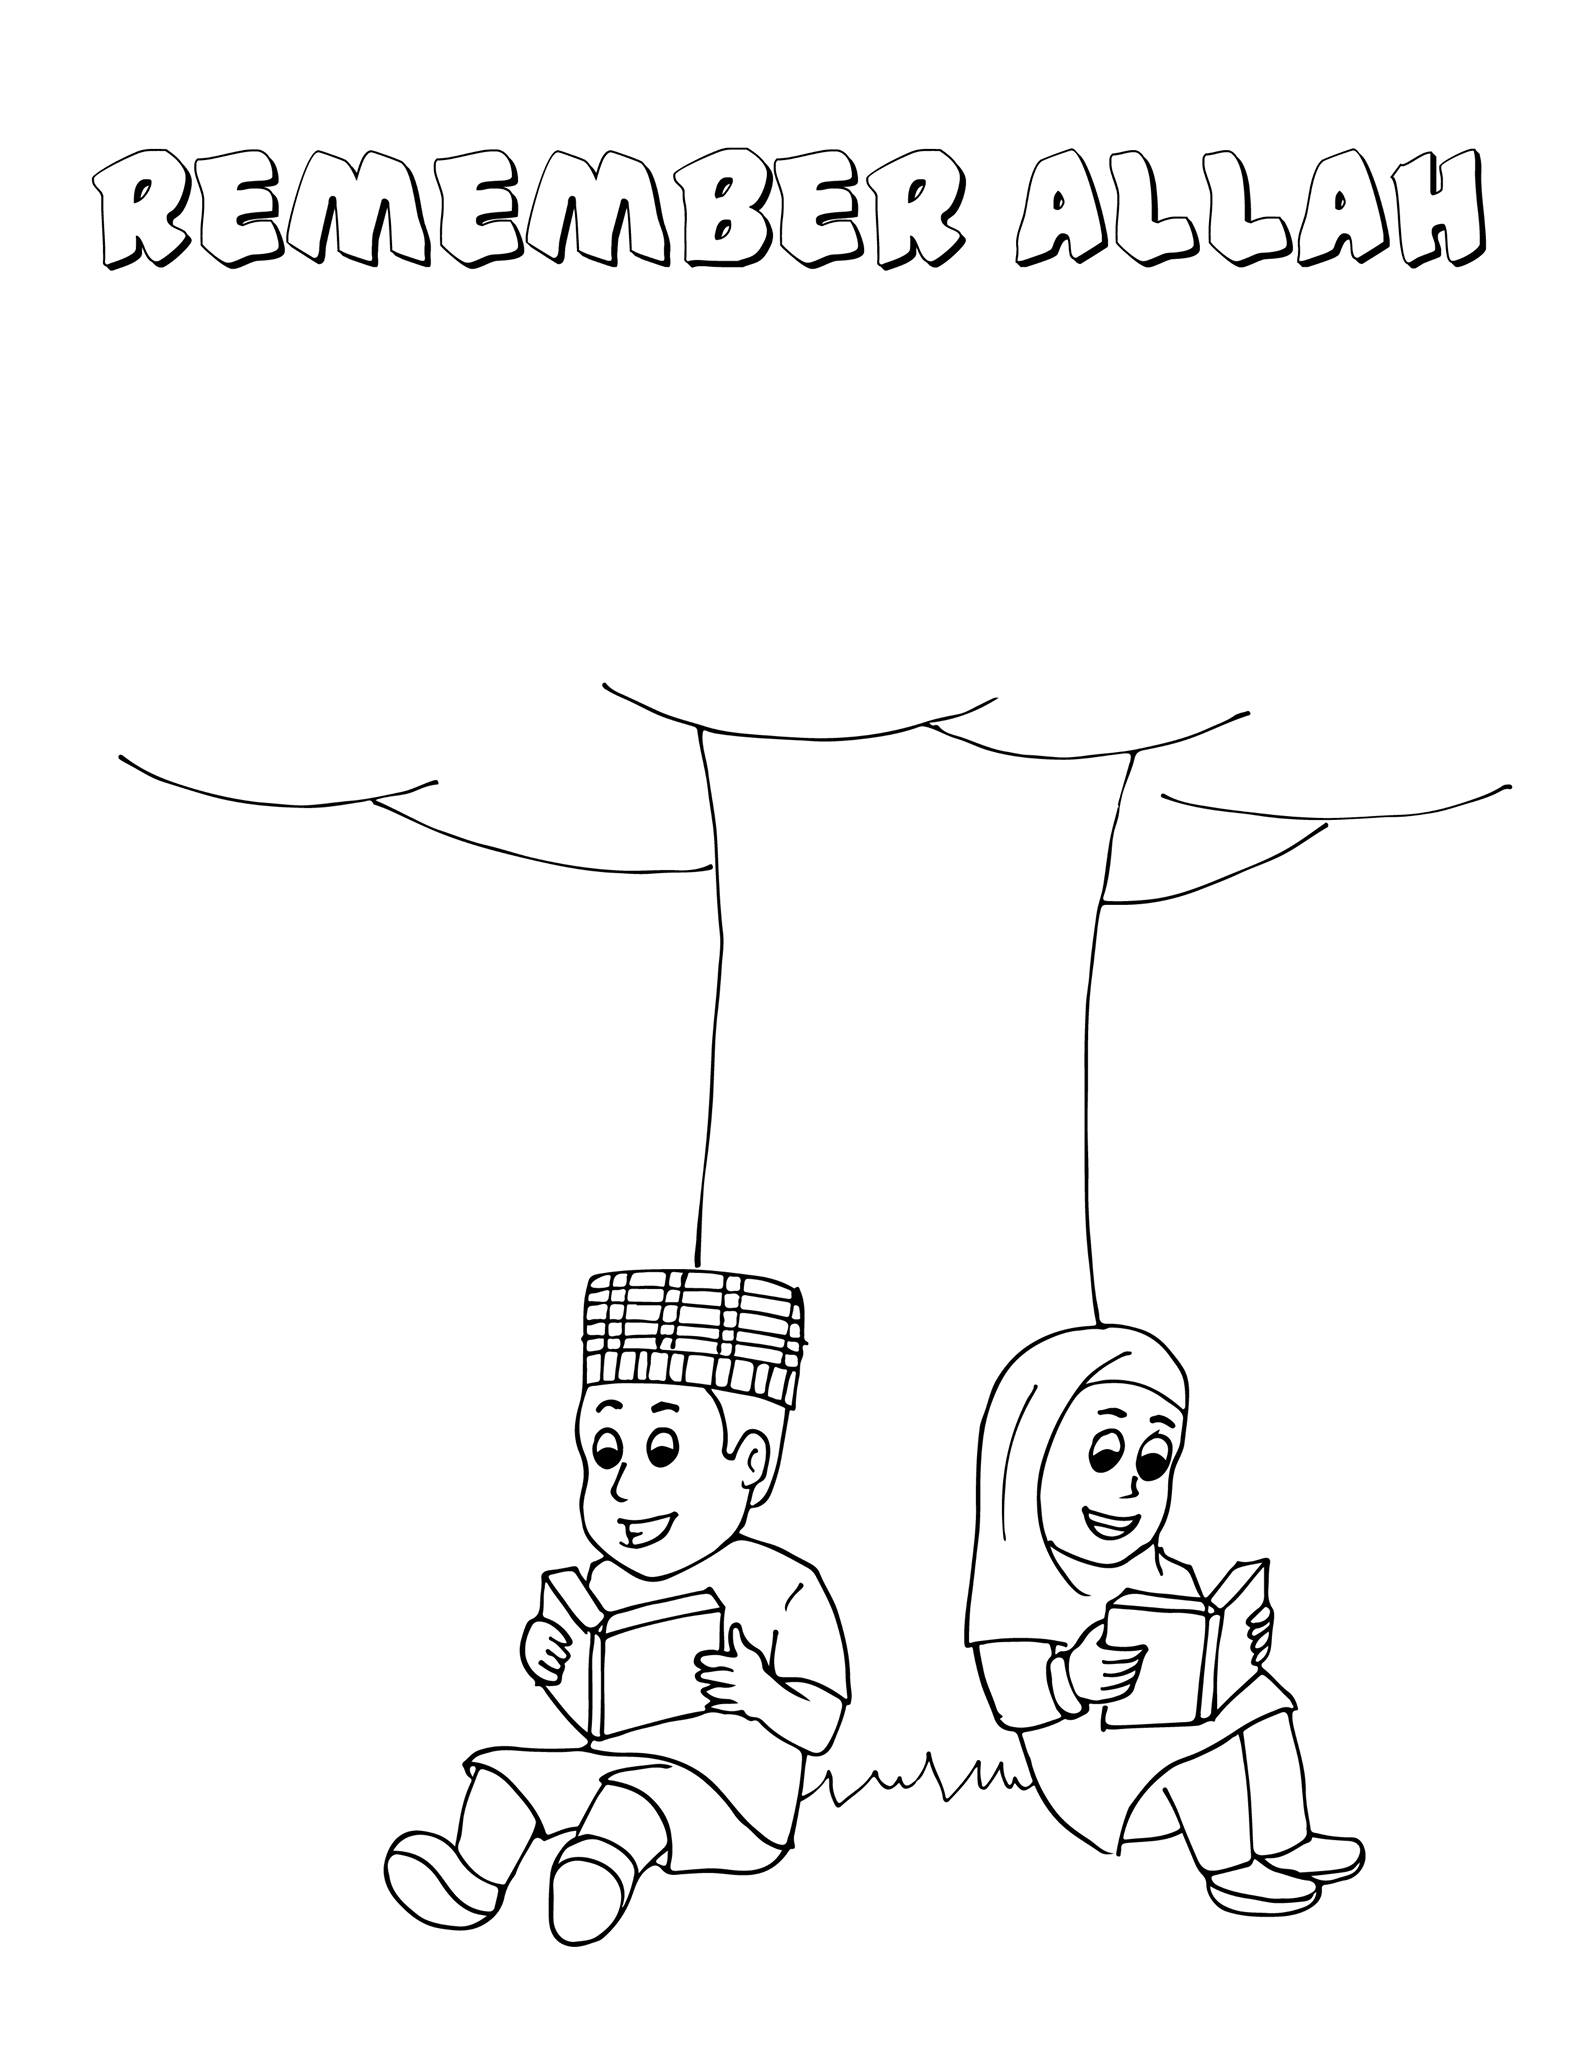 Noon Publications Islamic Coloring Book Arabic Playground View Full Image